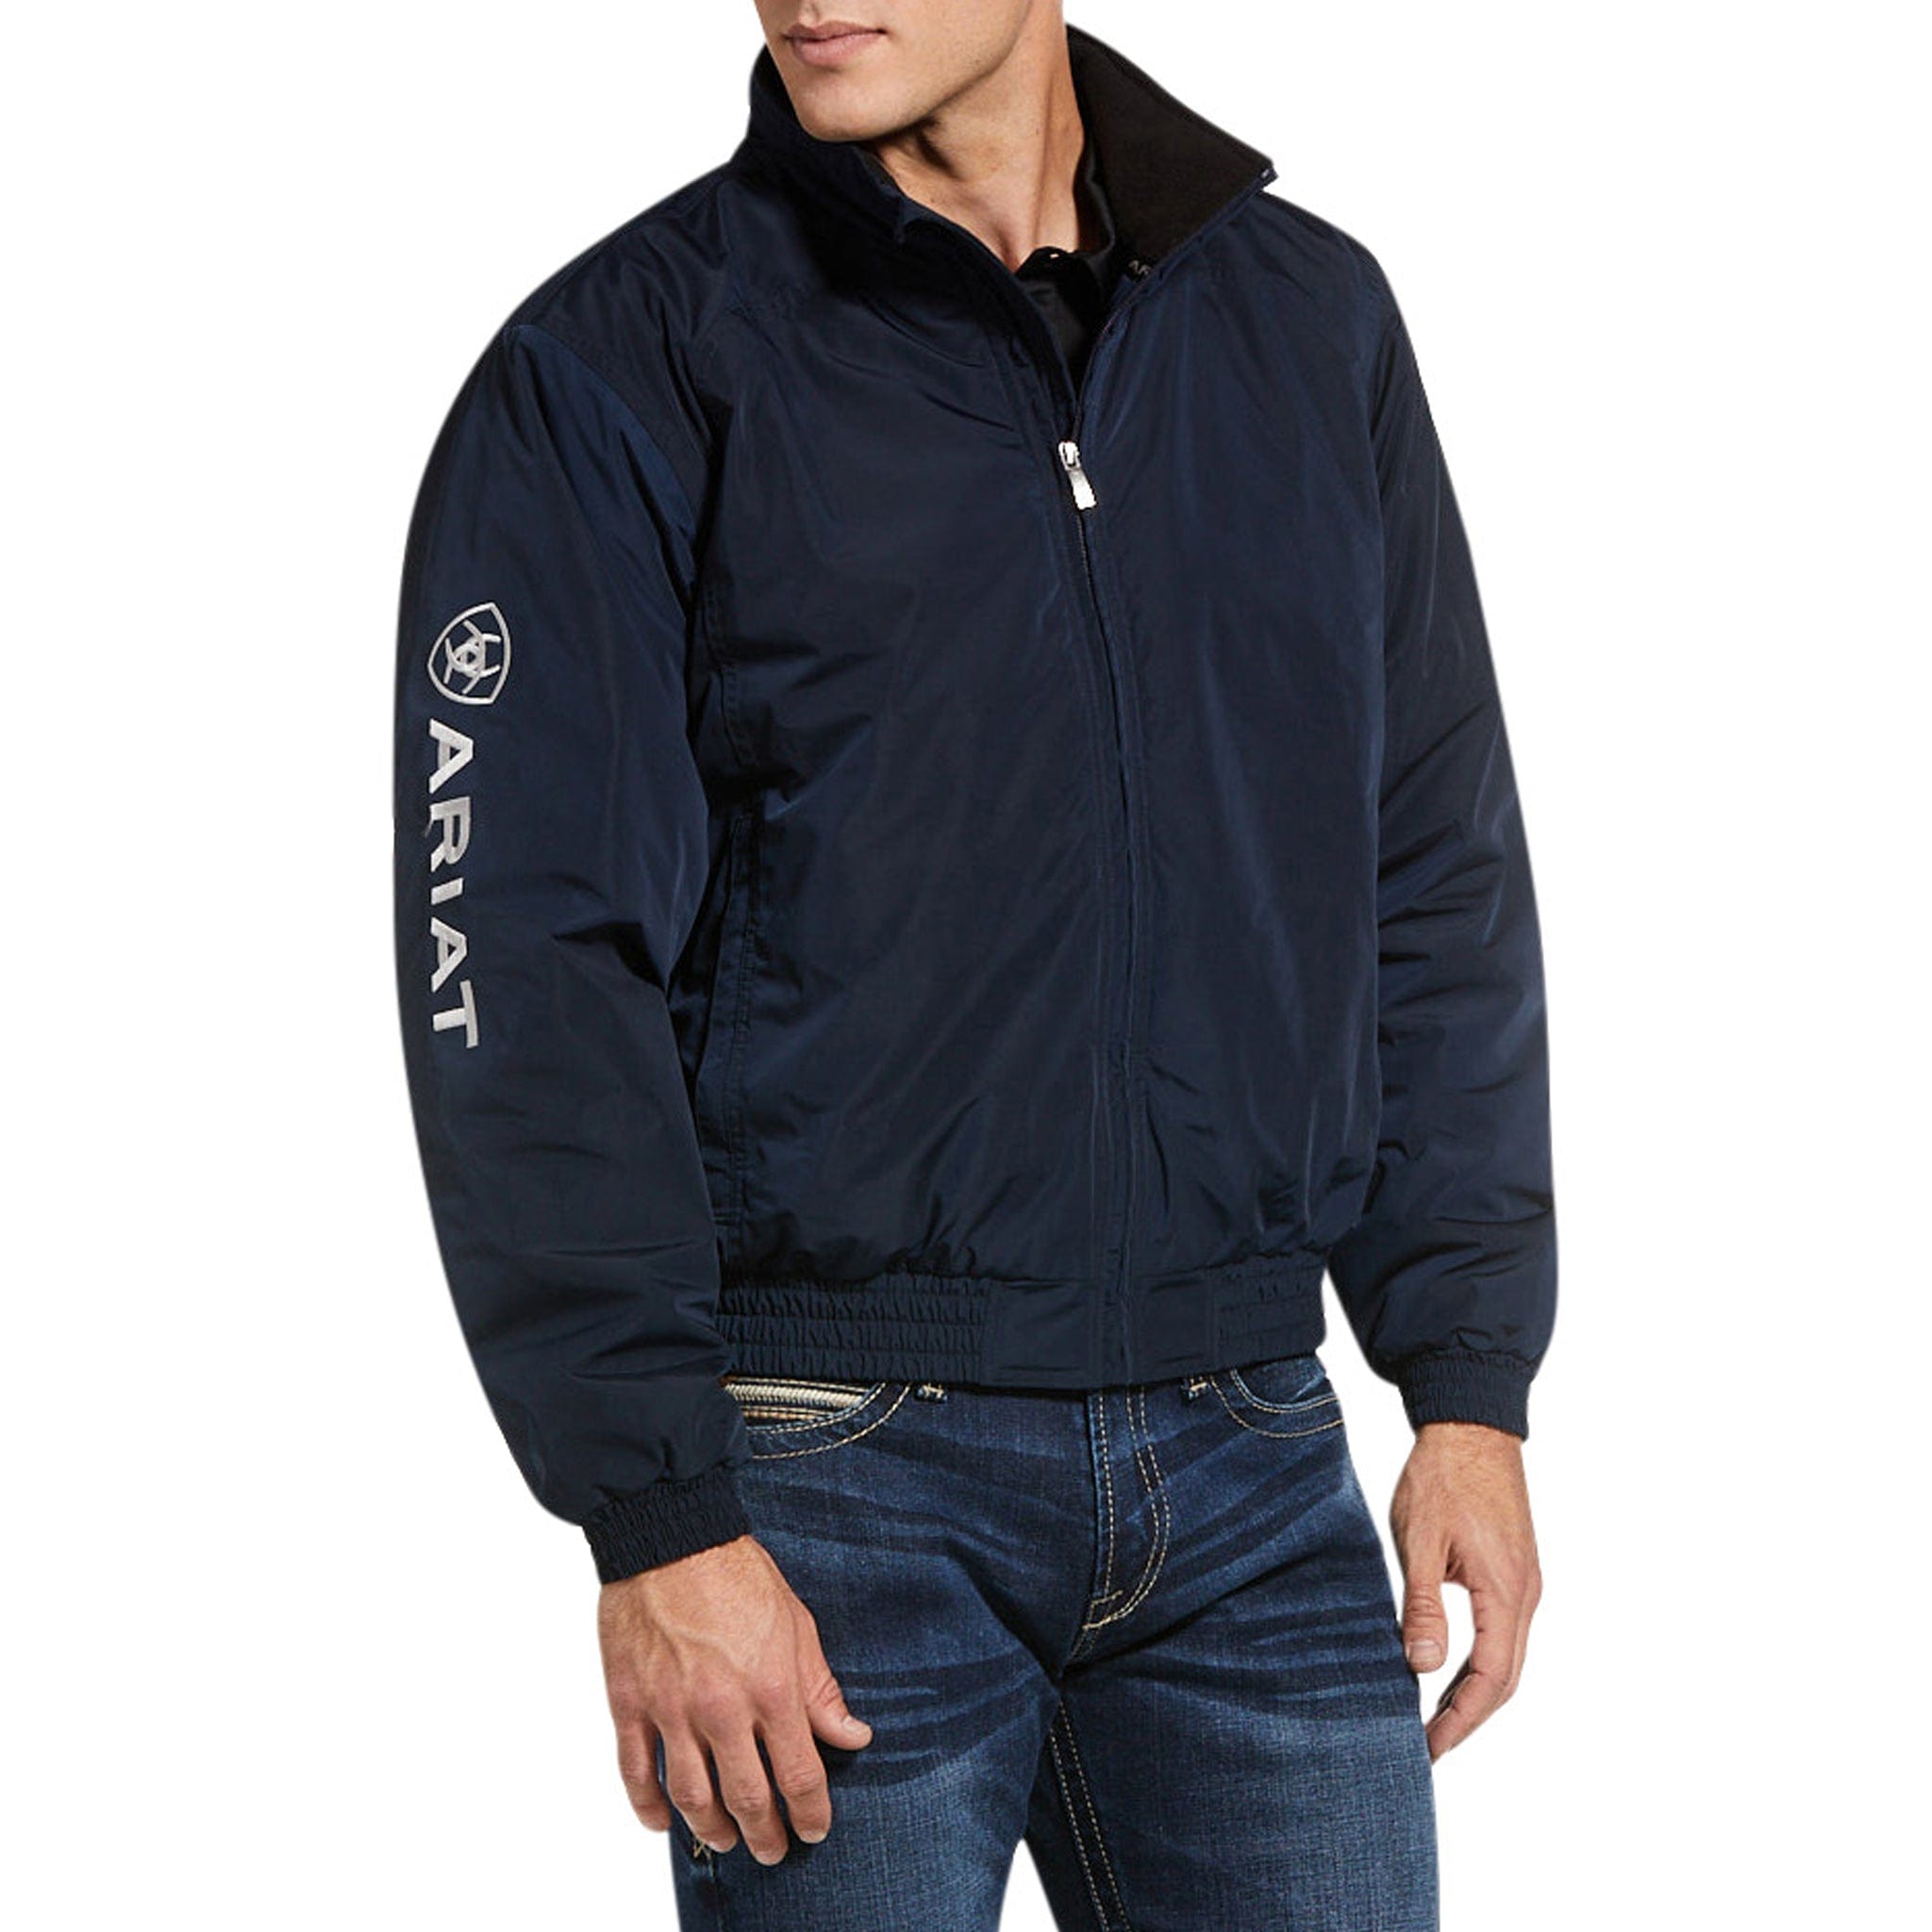 Ariat Men's Team Stable Insulated Jacket 10001716 Navy Front View